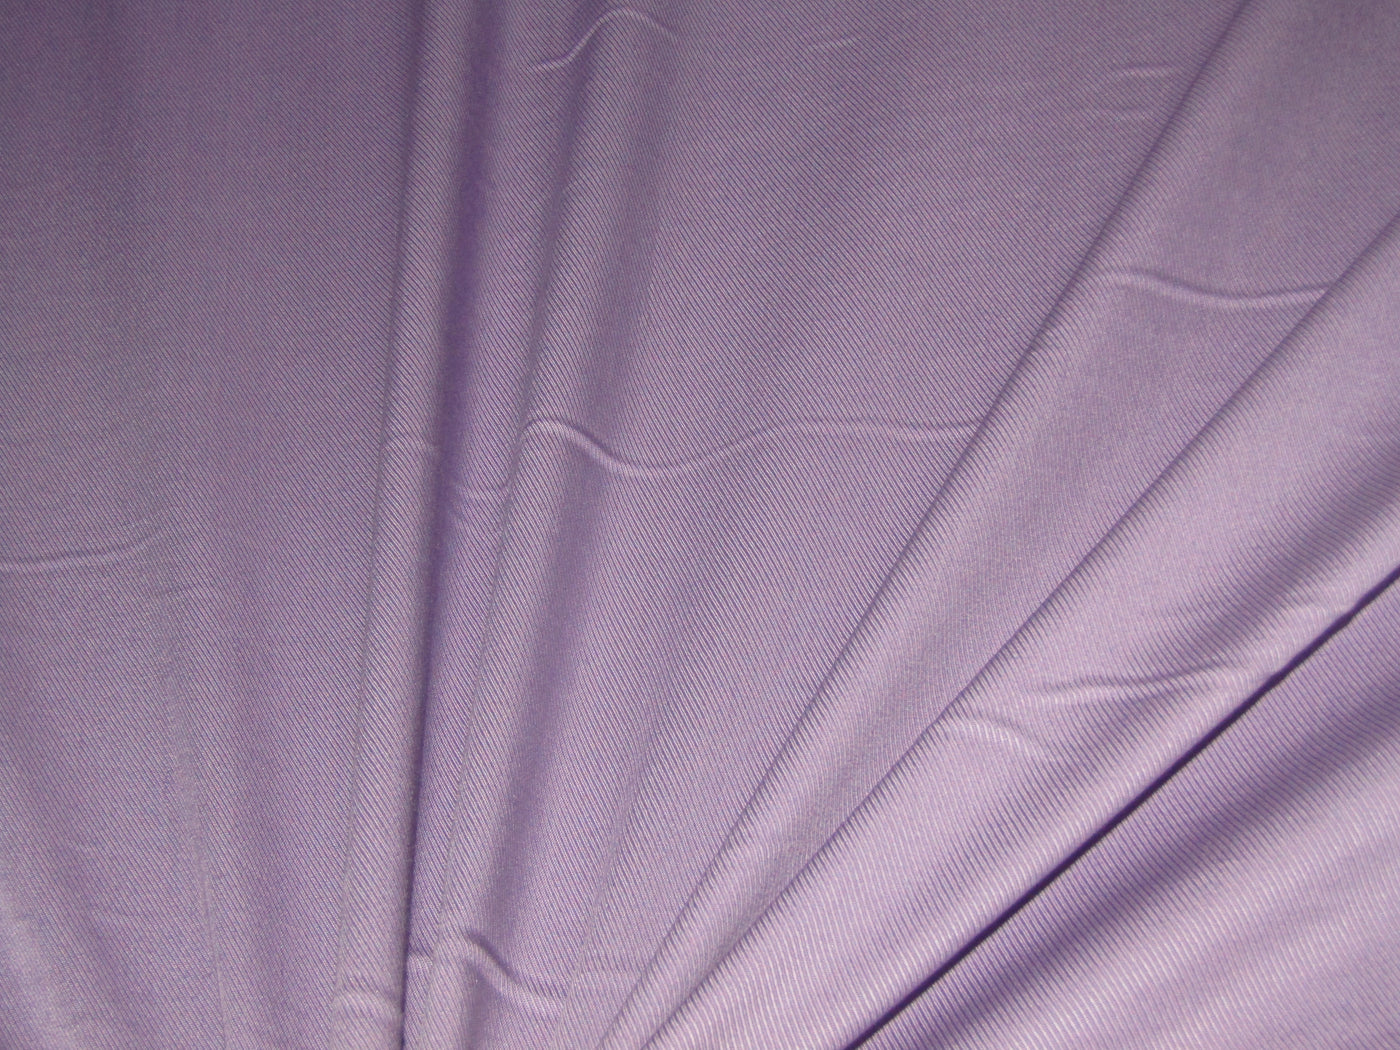 SUITING 100% TENCEL 350GRAMS/ 280GSM MADE IN INDIA 58" available in green/lilac/teal/rose pink and white ivory